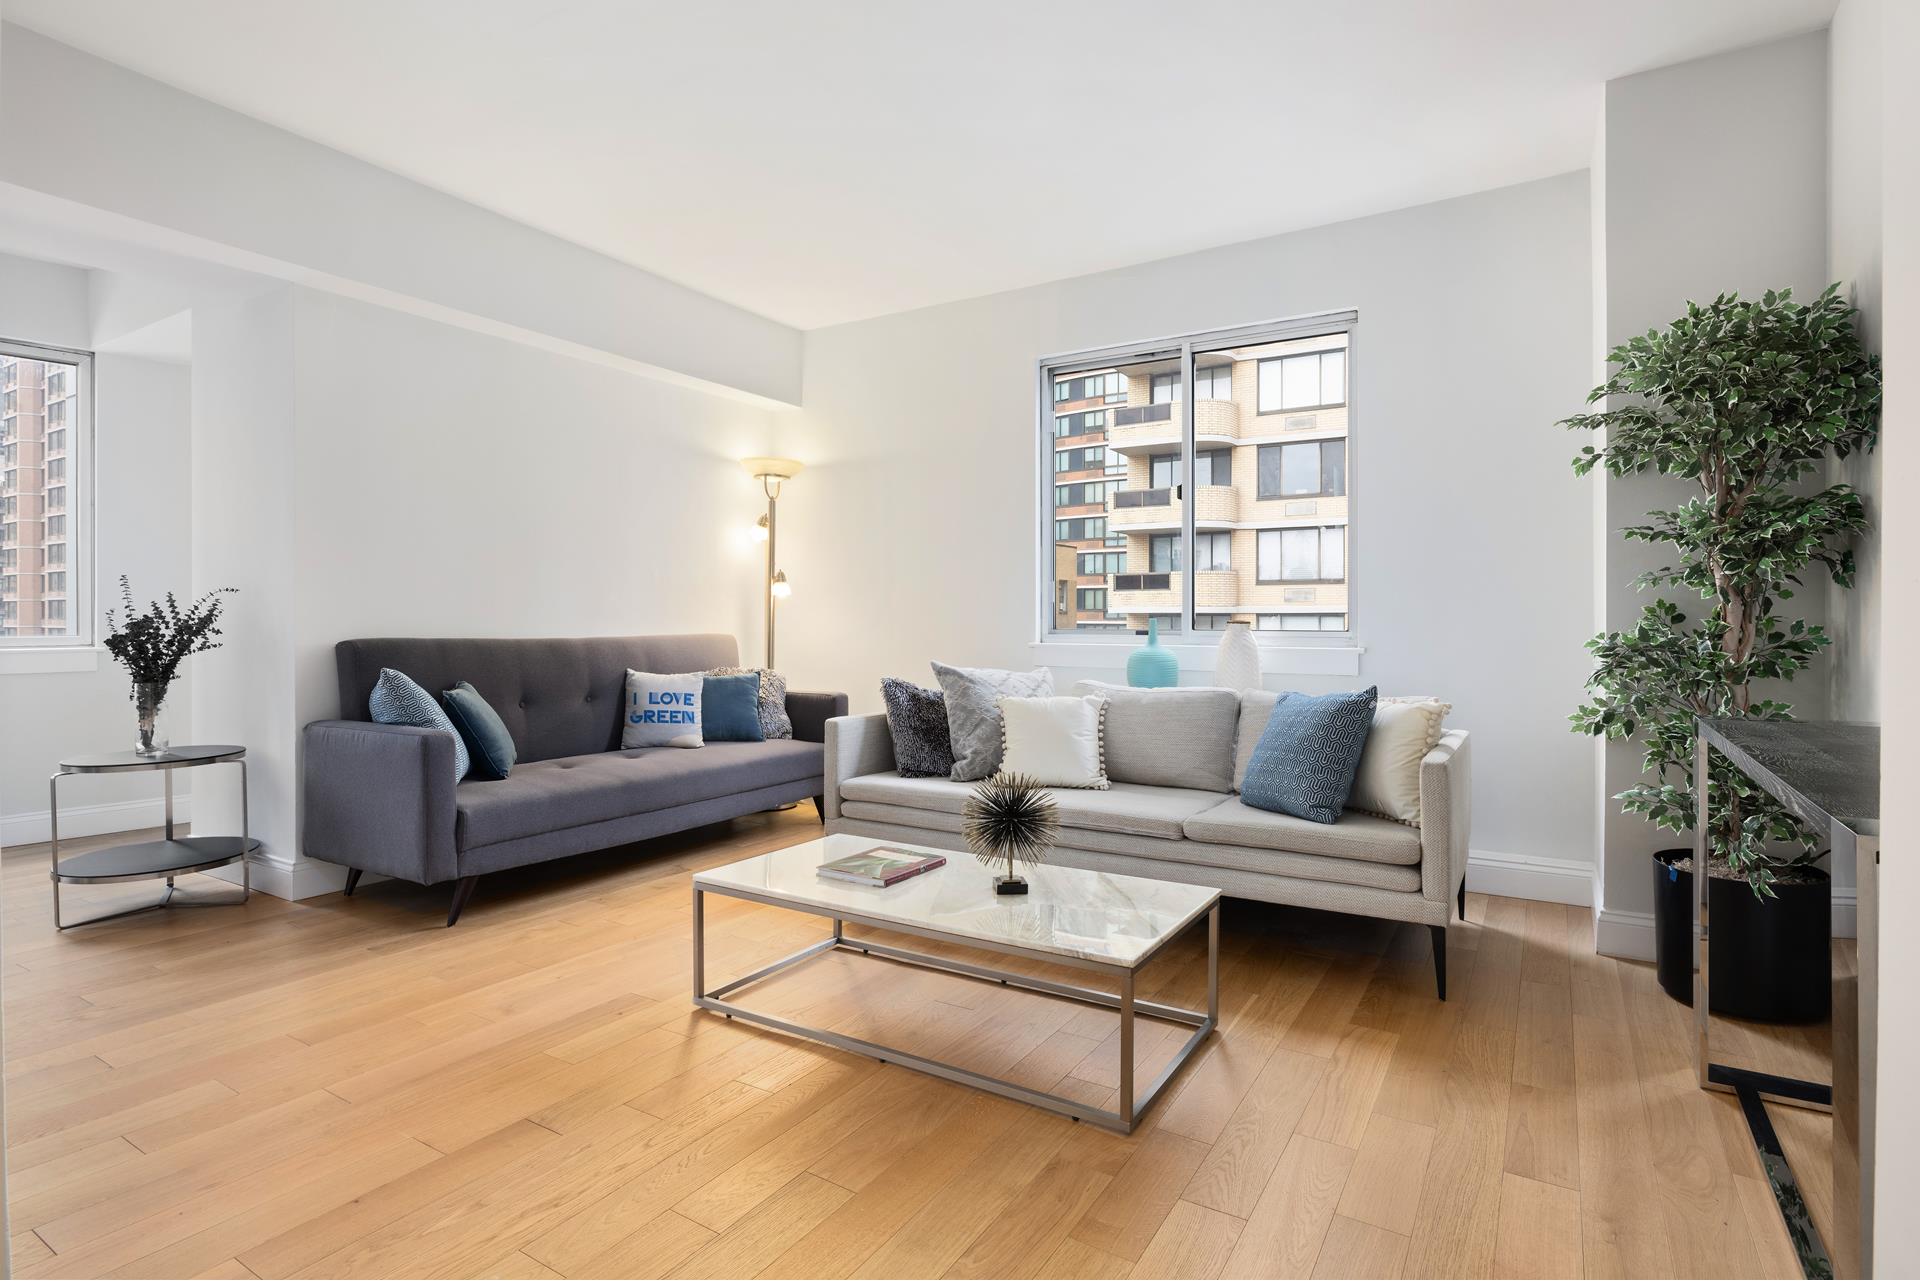 308 East 38th Street 19D, Murray Hill, Midtown East, NYC - 2 Bedrooms  
2 Bathrooms  
5 Rooms - 